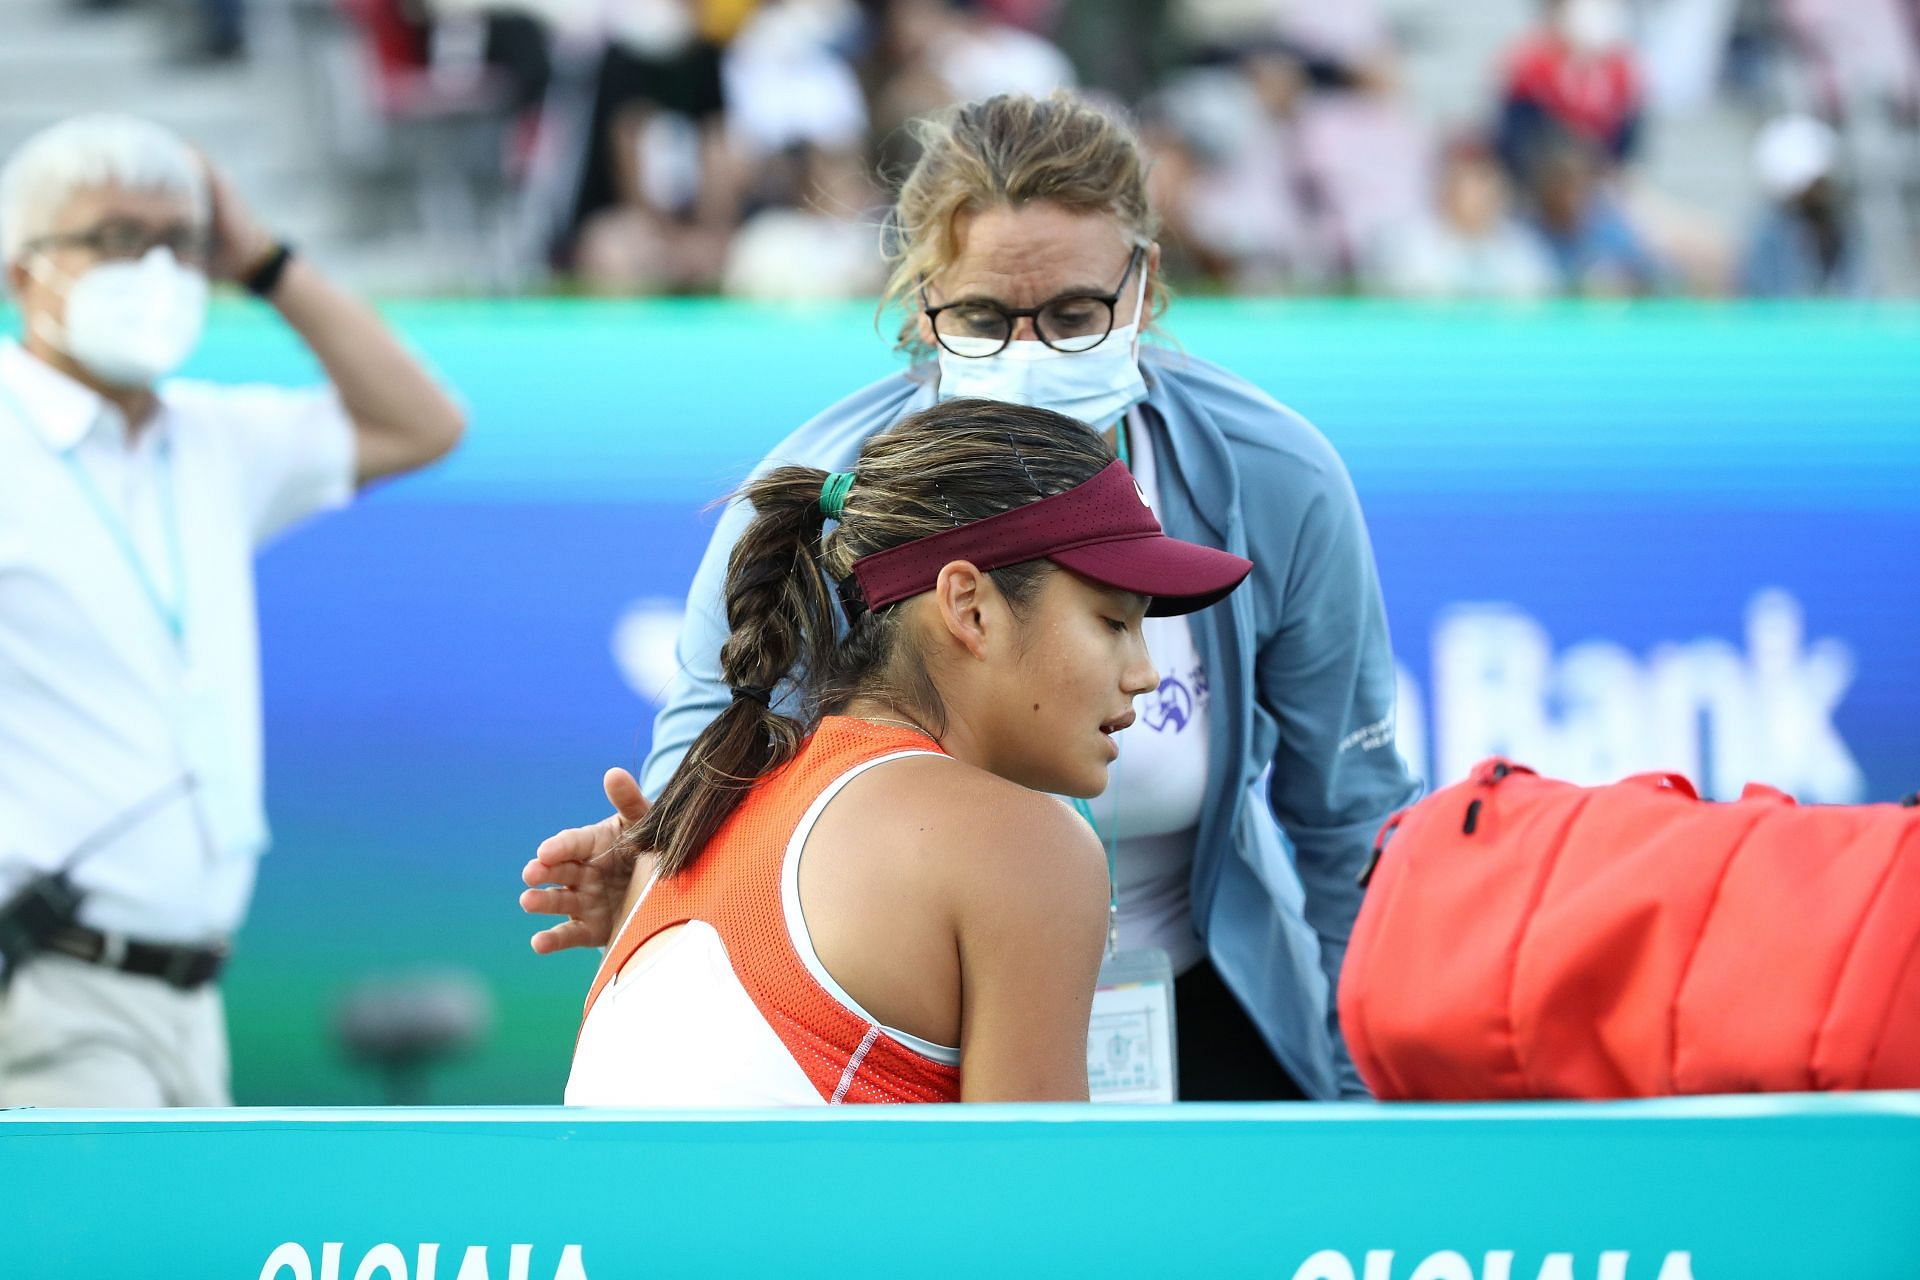 Emma Raducanu retired mid-match from her semifinal match at the Korea Open.